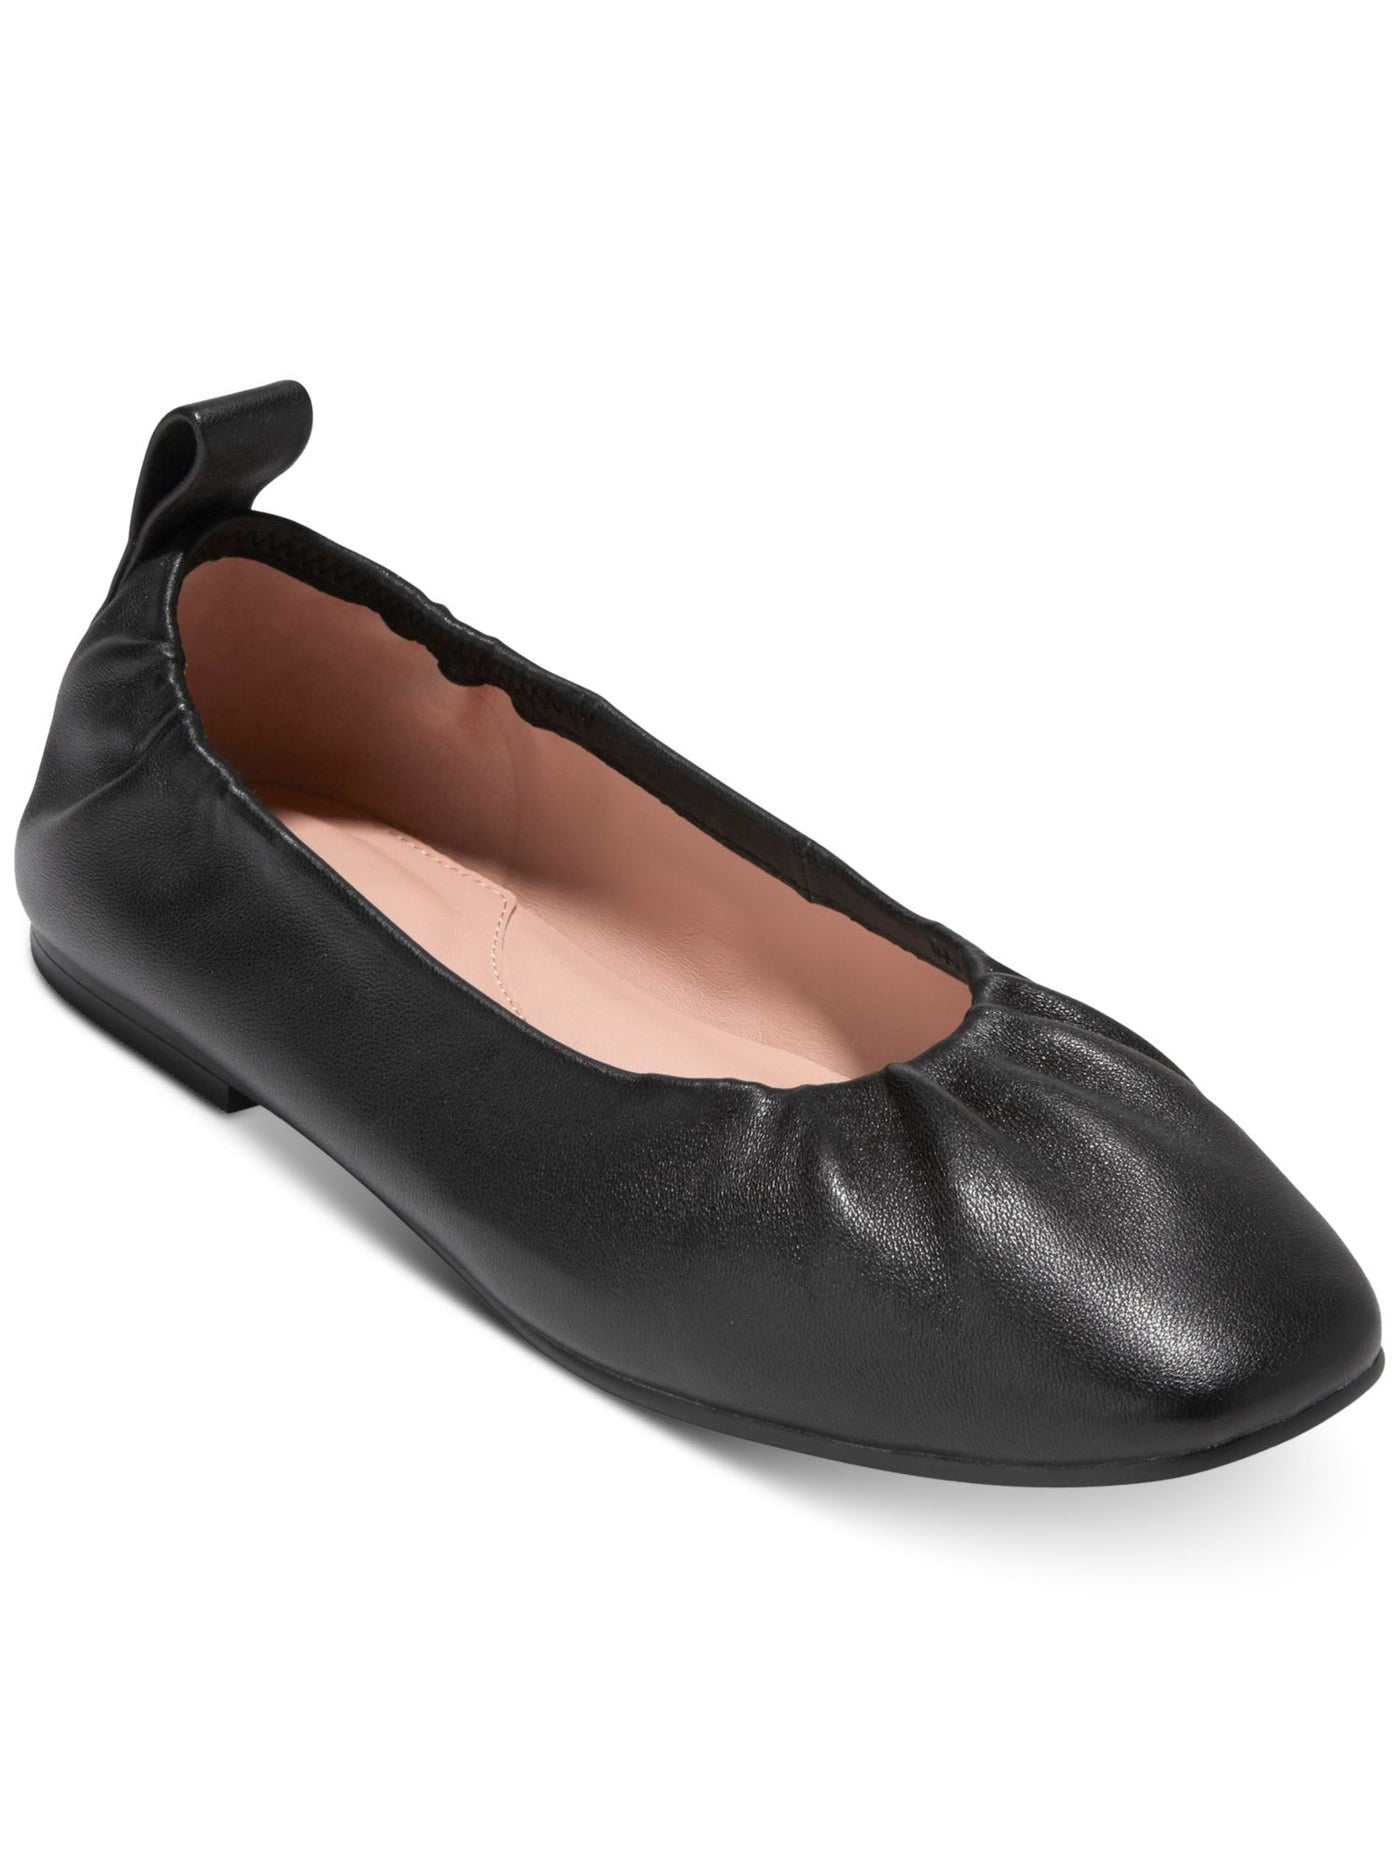 COLE HAAN Womens Black Ruched Back Pull-Tab Arch Support Cushioned York Round Toe Slip On Leather Ballet Flats 6 B